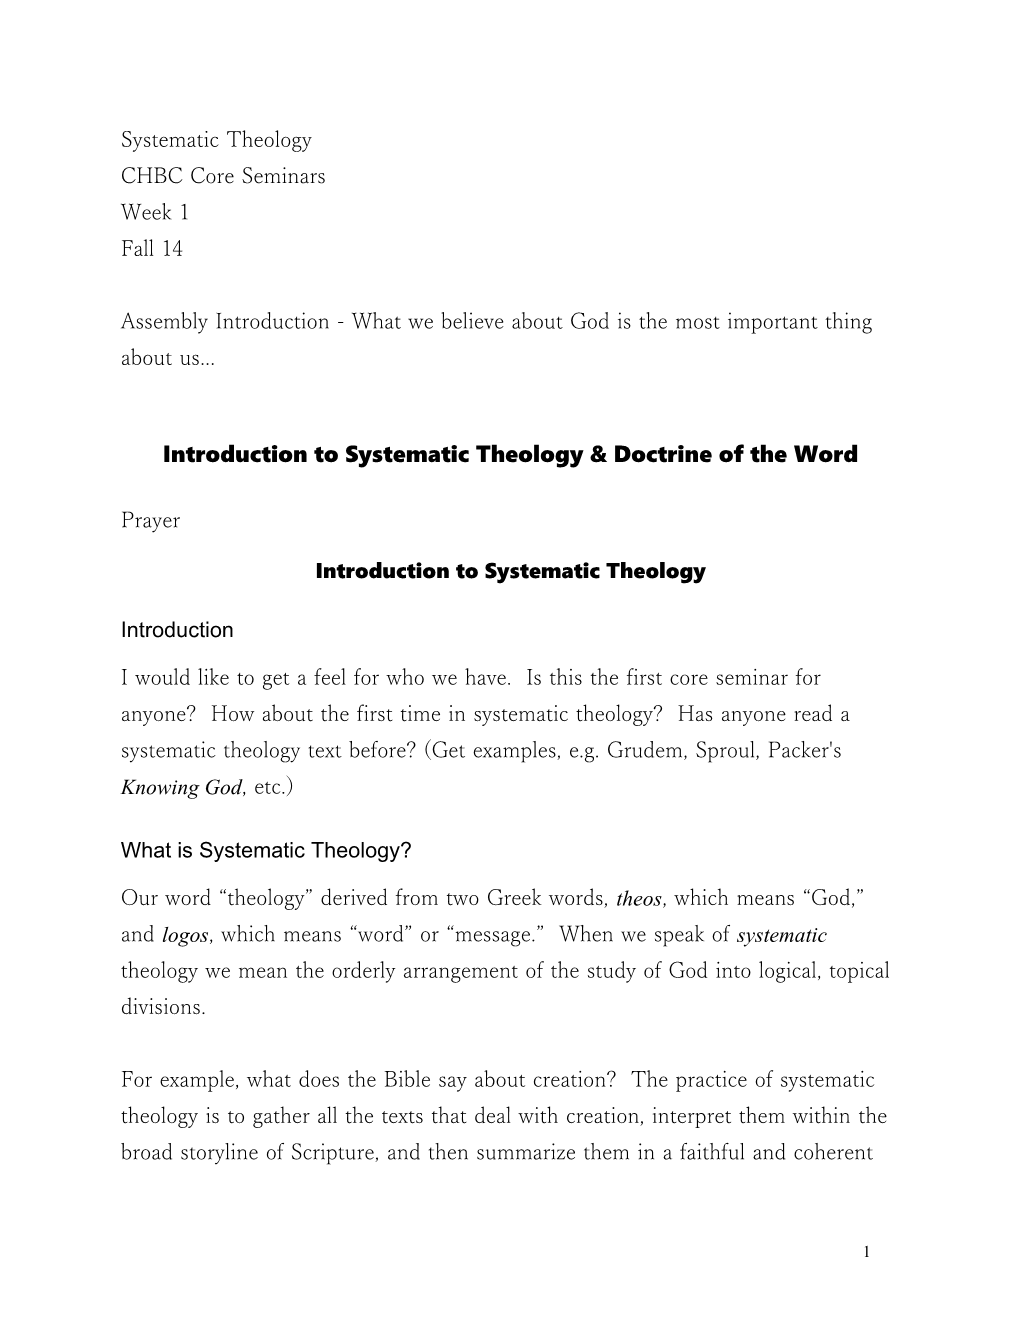 Introduction to Systematic Theology & Doctrine of the Word